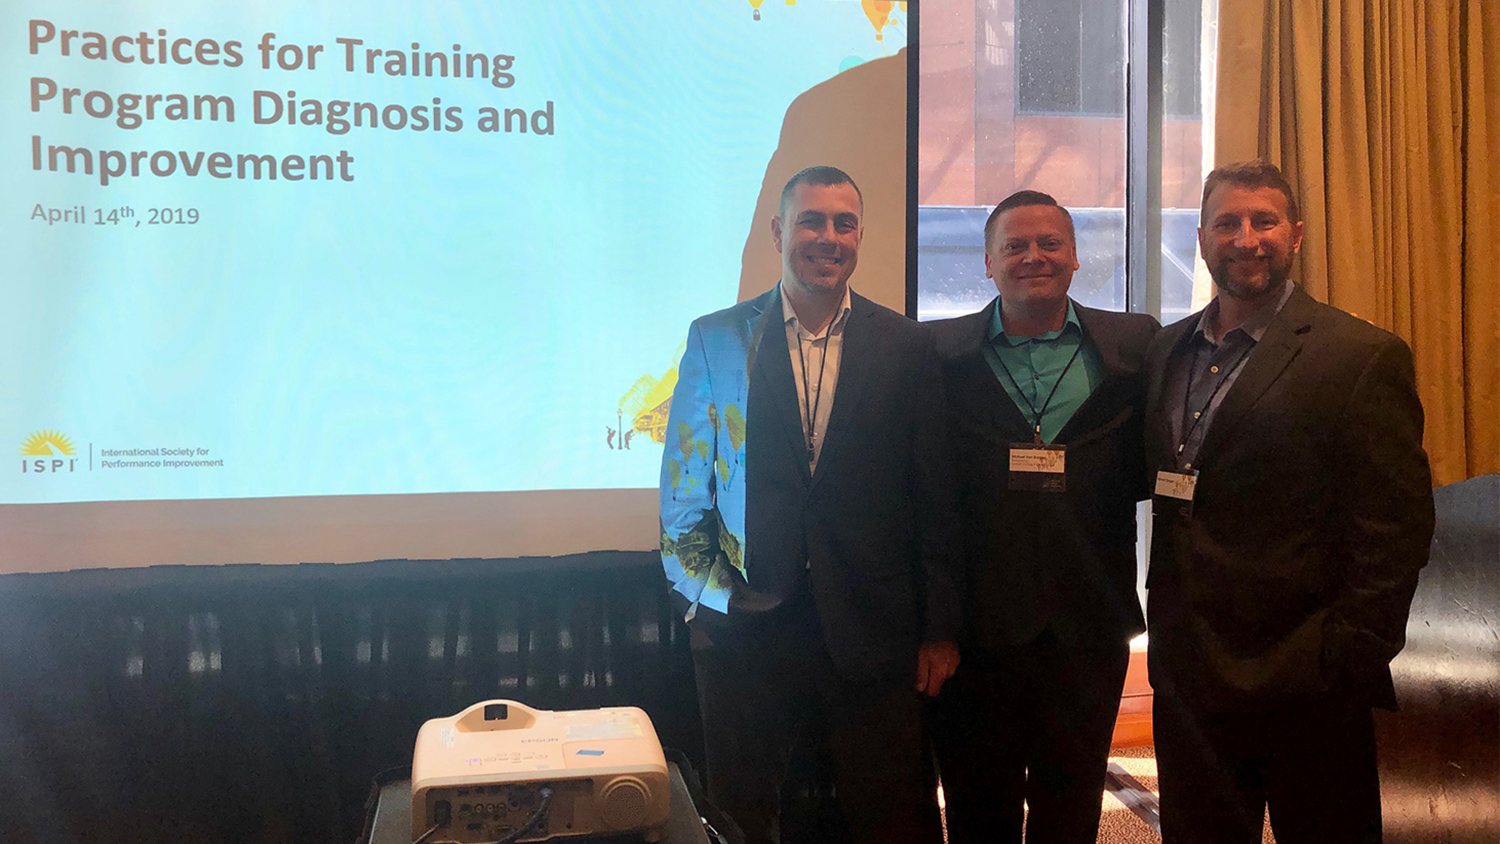 Jason Cook, Michael Von Bargen and Richard Singer at the International Society for Performance Improvement (ISPI) Annual Conference in New Orleans in April 2019. The group is set to graduate from the Master of Education in Training and Development program this May. The three are pictured in front of their presentation screen.